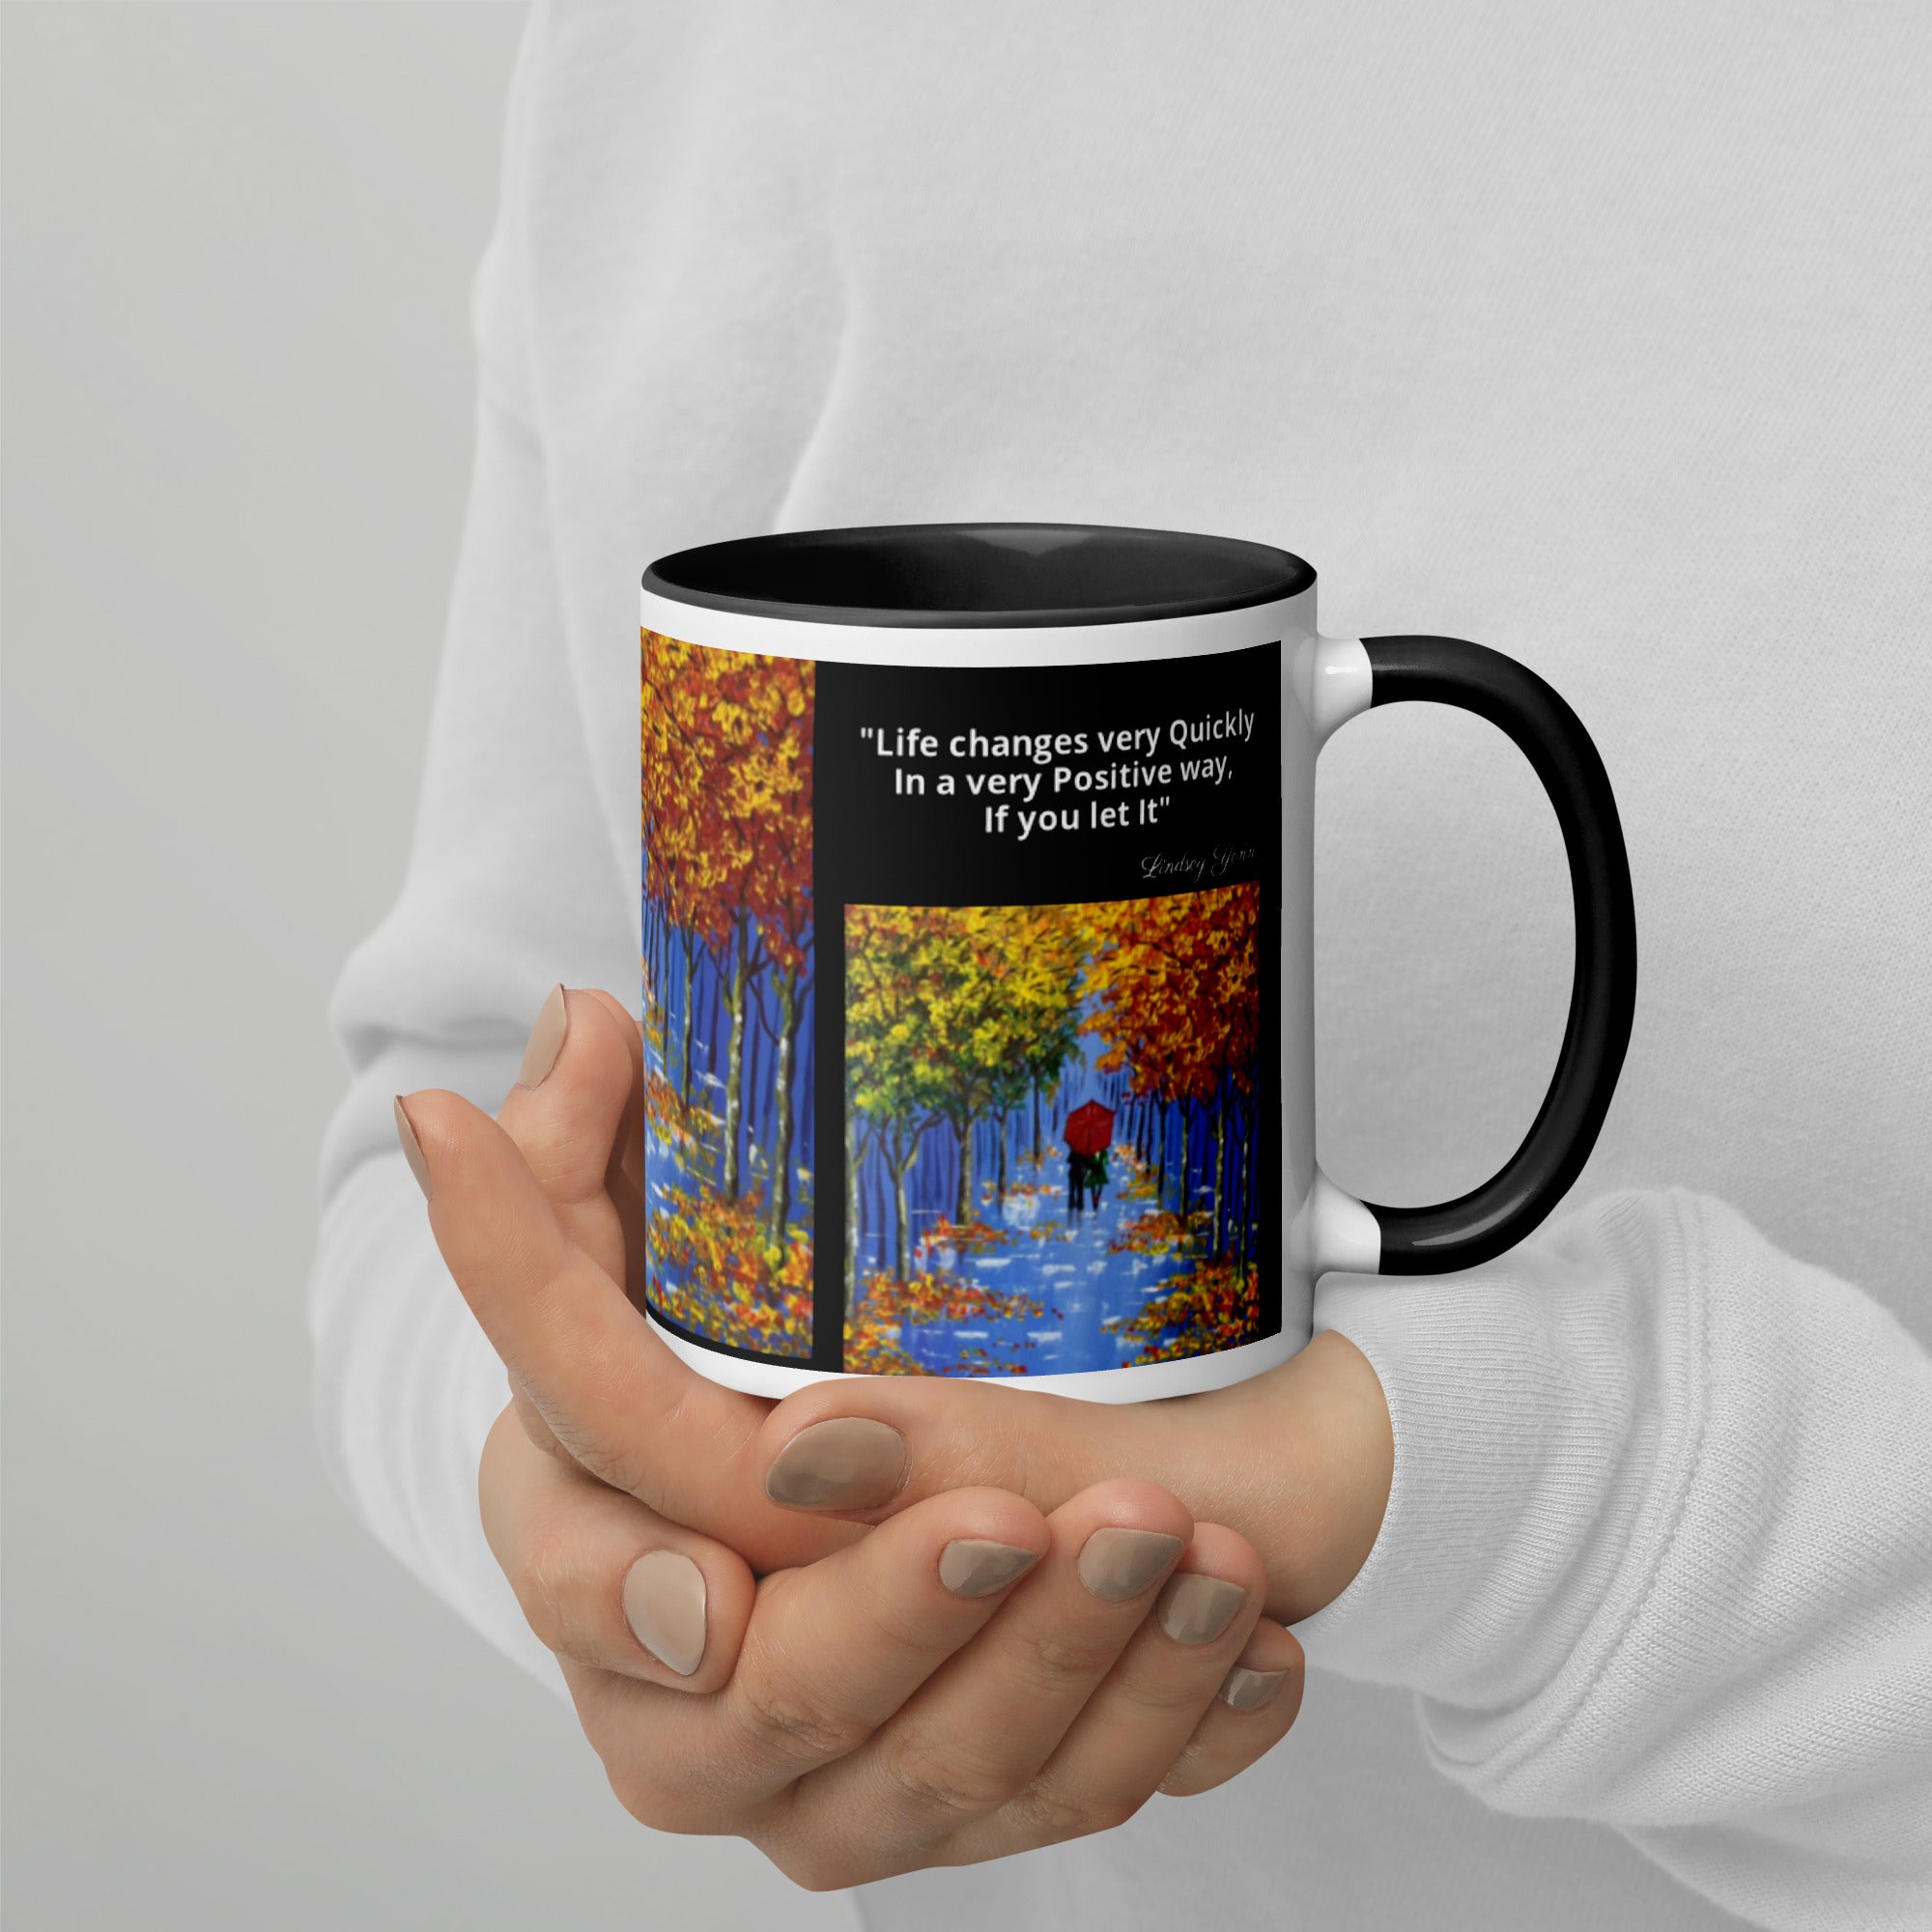 Hoodies4You "Morning Walk" Mug "Life changes very Quickly In a very Positive way, If you let It" Quote by Lindsey Yonn